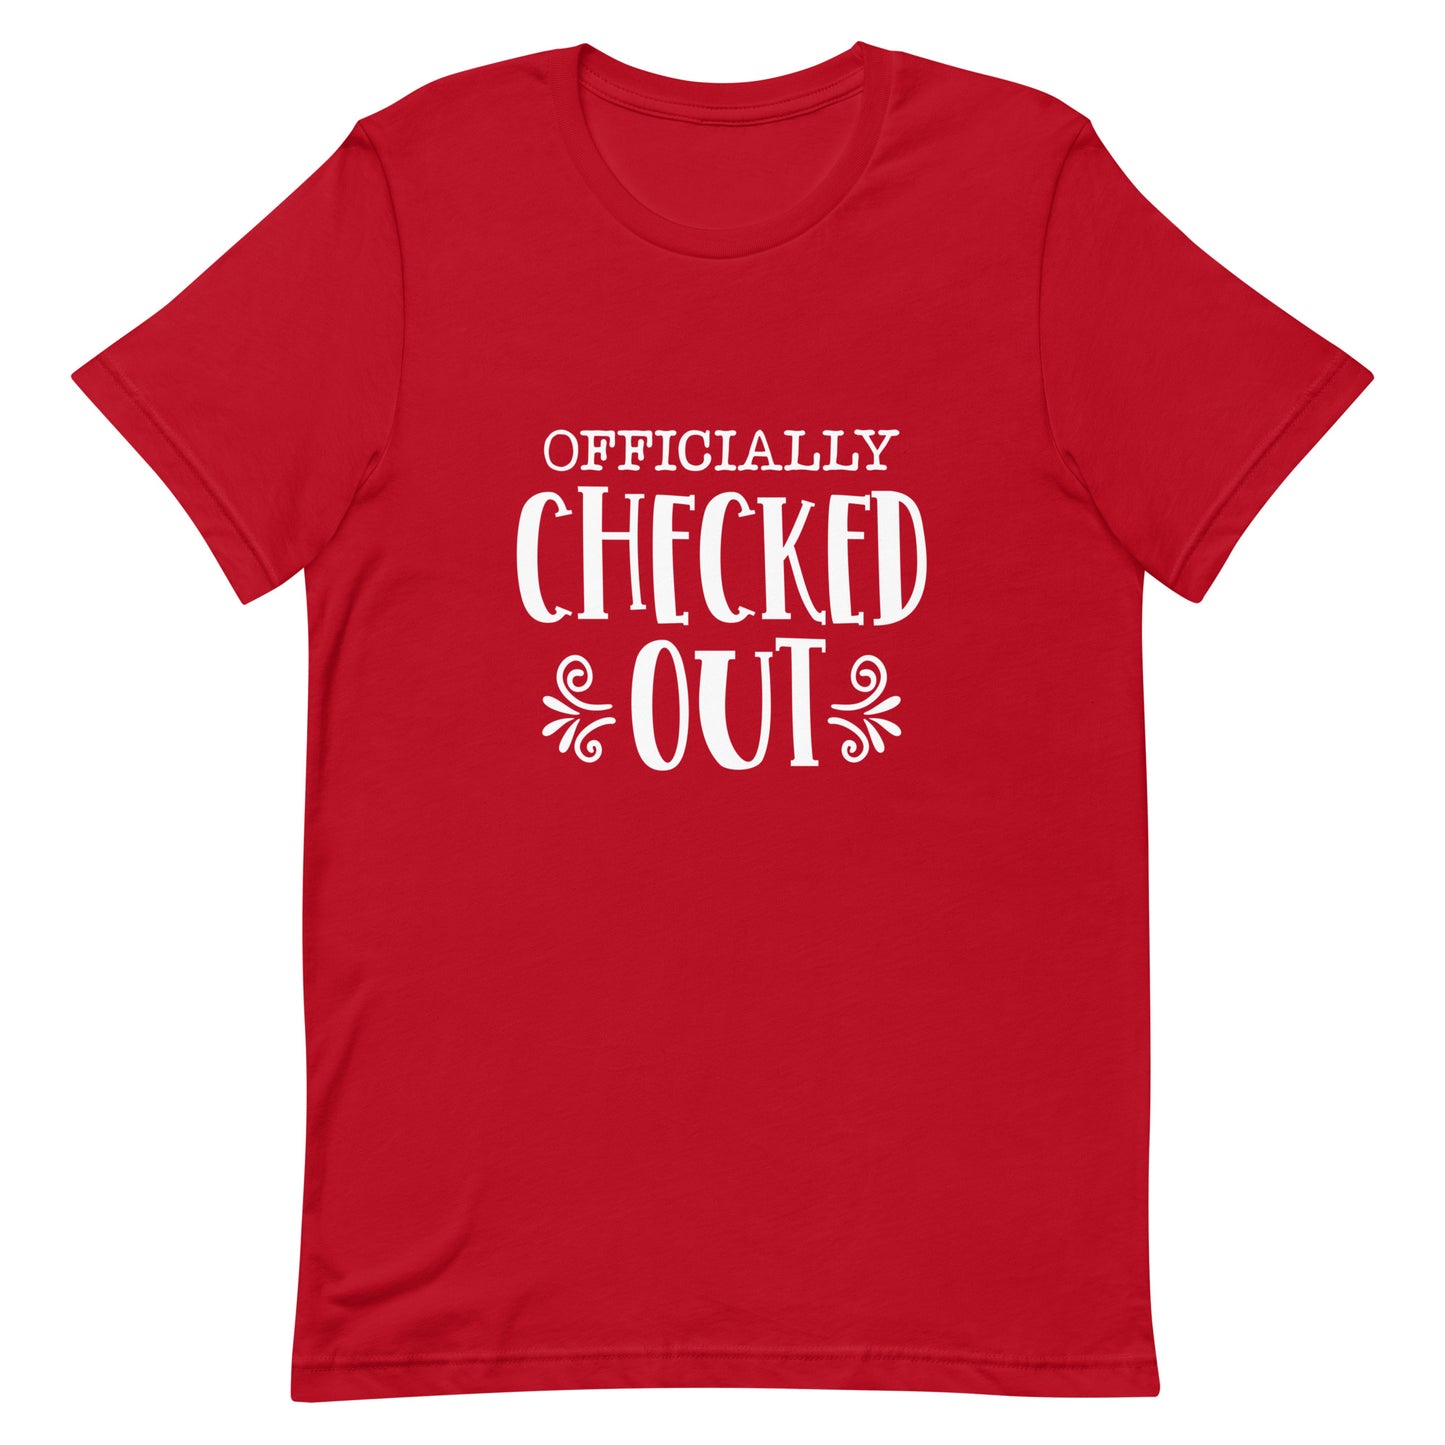 Officially Checked Out Unisex t-shirt